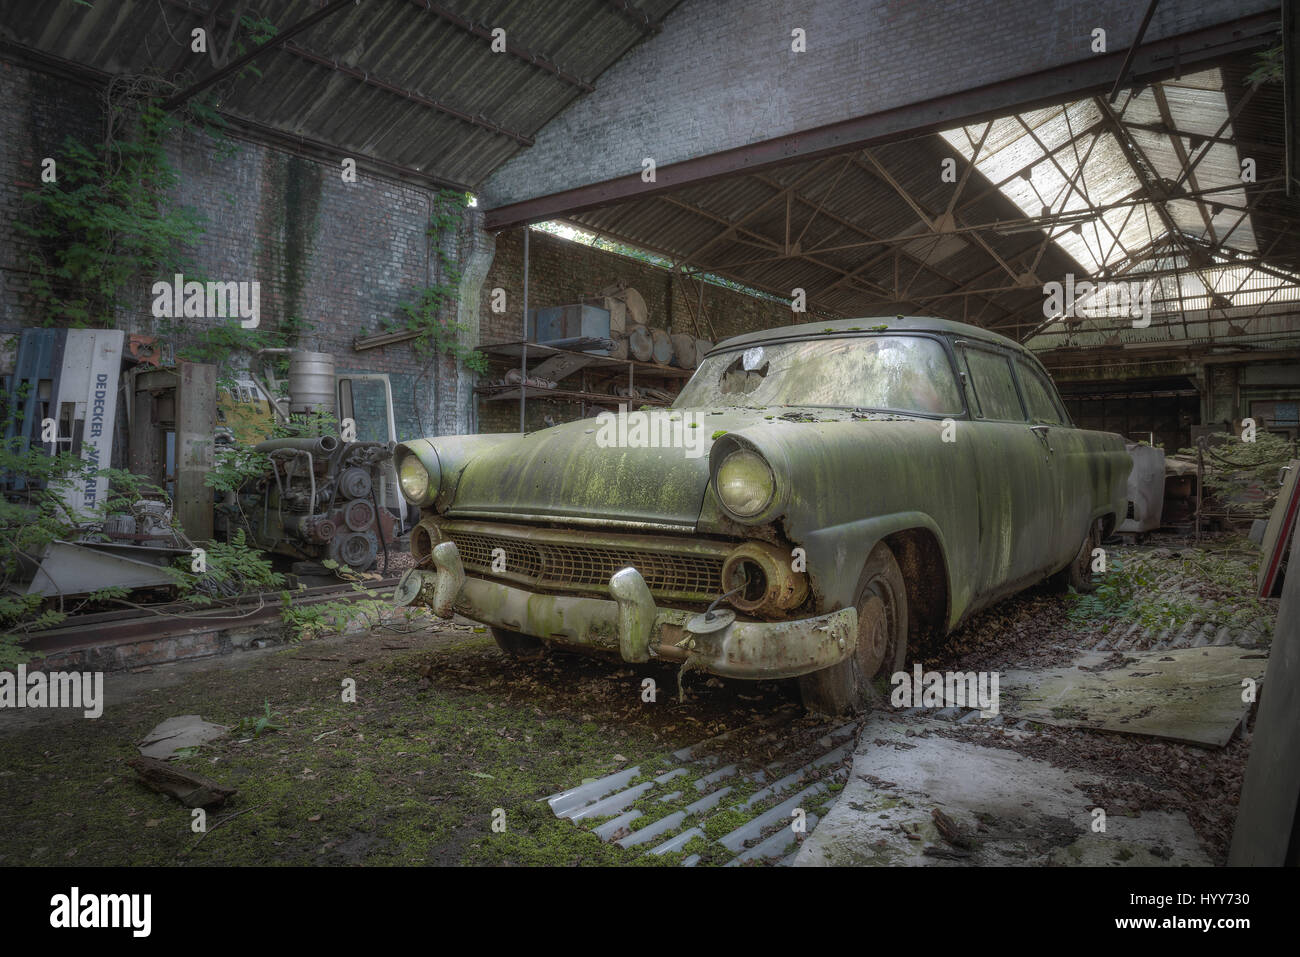 STUNNING images reveal the vulnerable beauty of abandoned cars that have been left to rust over the years. The collection of spectacular images show how a Volkswagen Beetle, Citroën C2 and even a Ferrari have been taken over by nature and piles of rubble. In other shots, a Mercedes Benz is overgrown with ivy and an old-fashioned BMW has been left in a garage with a collapsing roof and debris on the floor. A Ford vehicle has also been forgotten in the woods and one car even appears to have a tree growing from it. The haunting images were taken by Belgian security guard, Kenneth Provost (31) at  Stock Photo